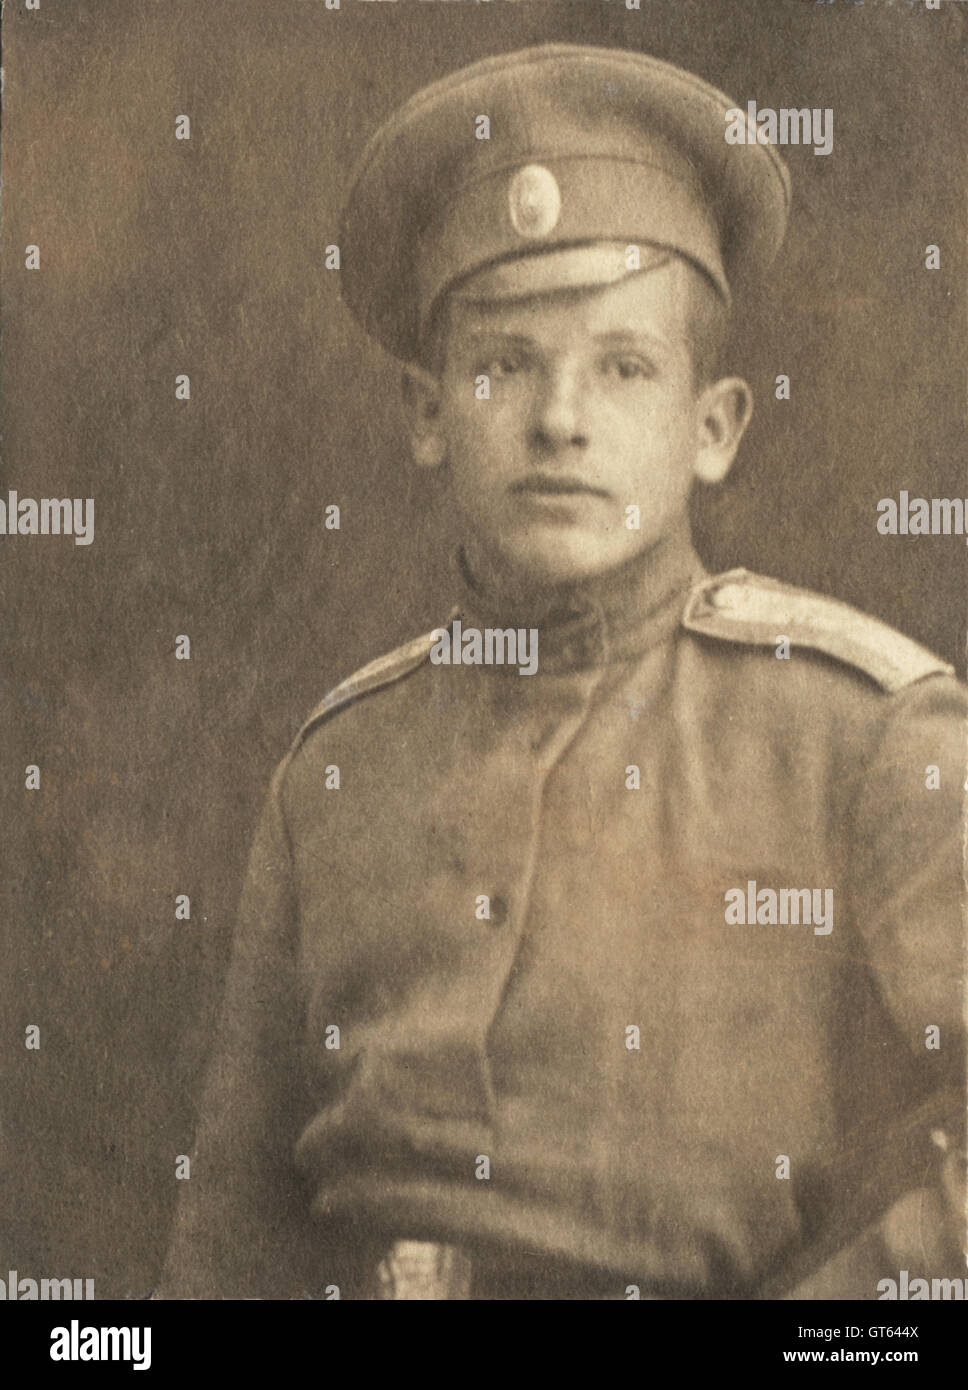 Vintage portrait of the young man in the military uniform at the beginning of the twentieth century, Russia Stock Photo